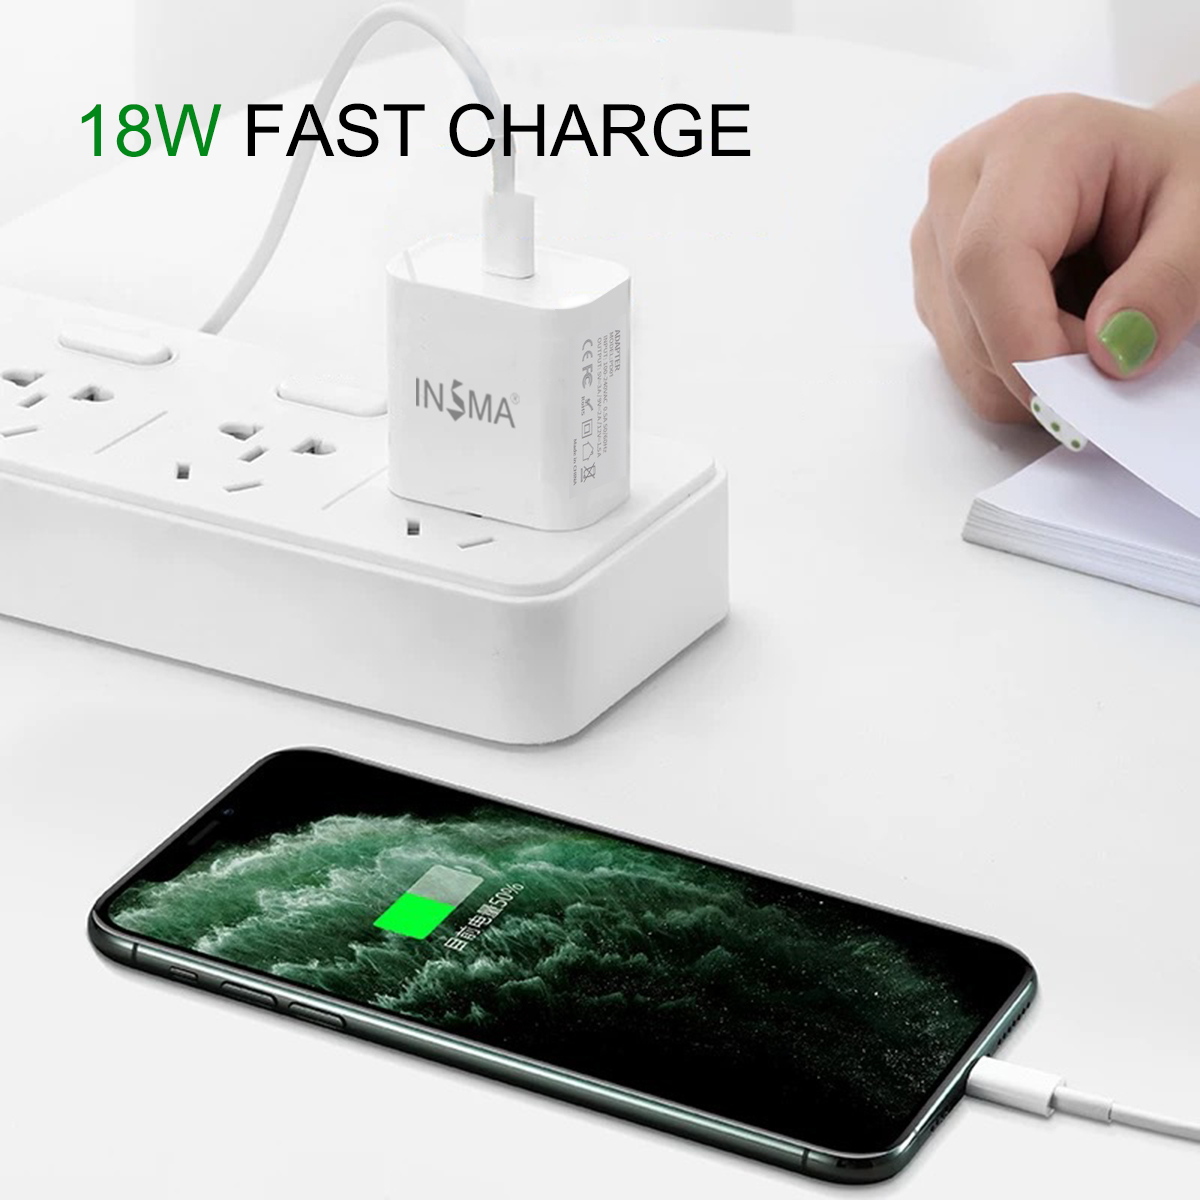 INSMA 18W Fast Charger PD3.0 USB Charger Type-C Adapter For iPhone 8 X XS 11 Pro